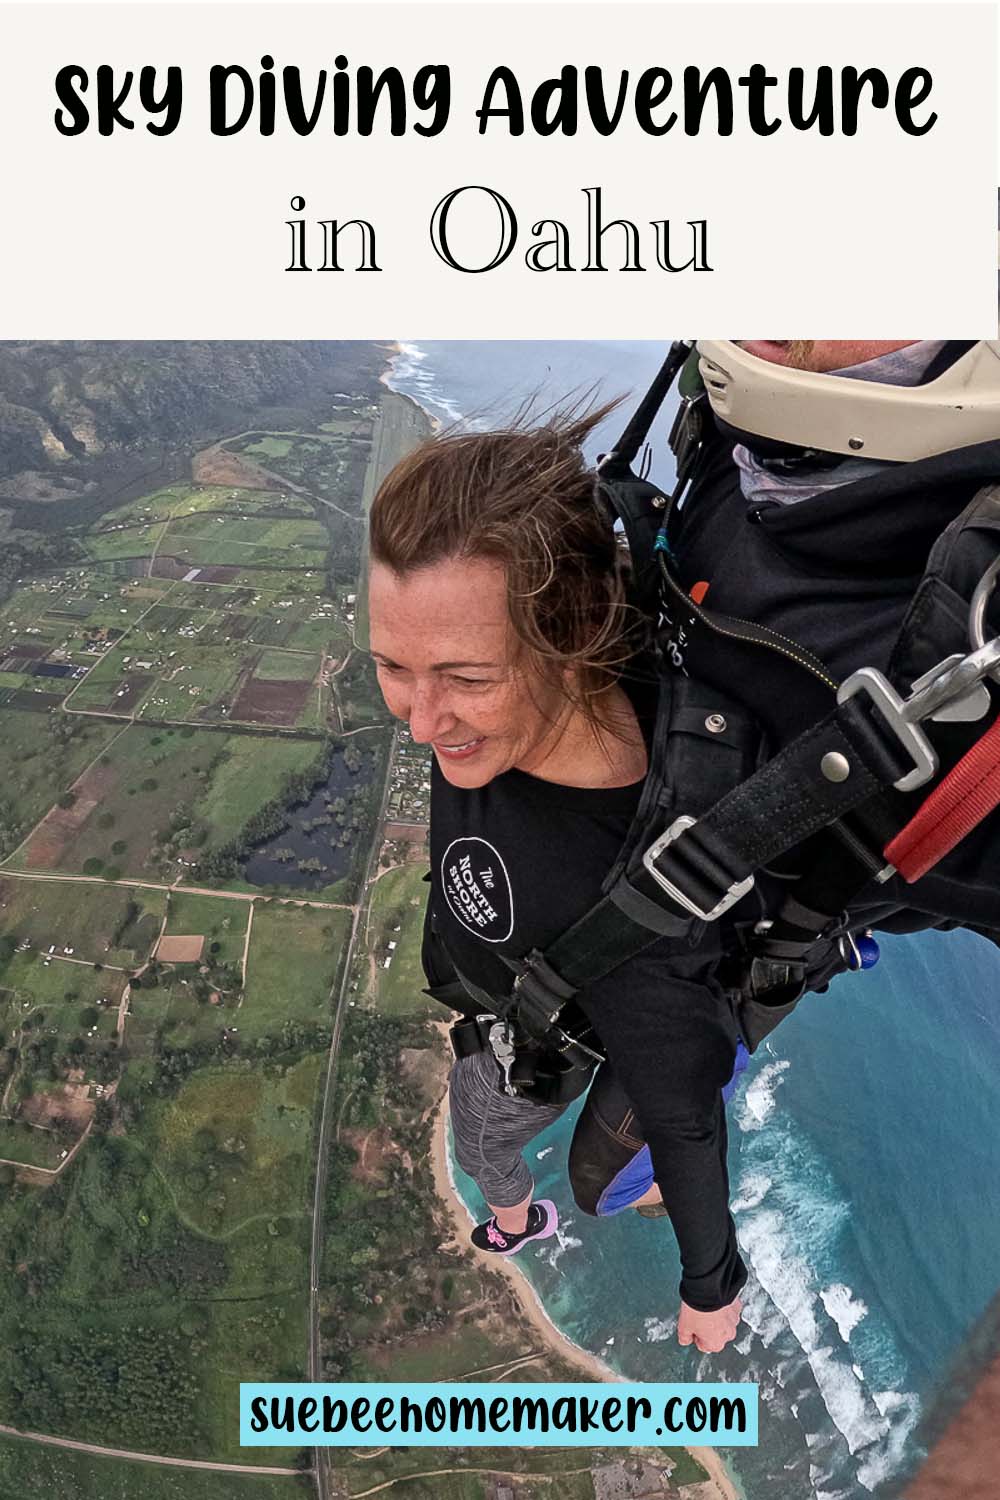 A photo of me sky diving in Oahu.